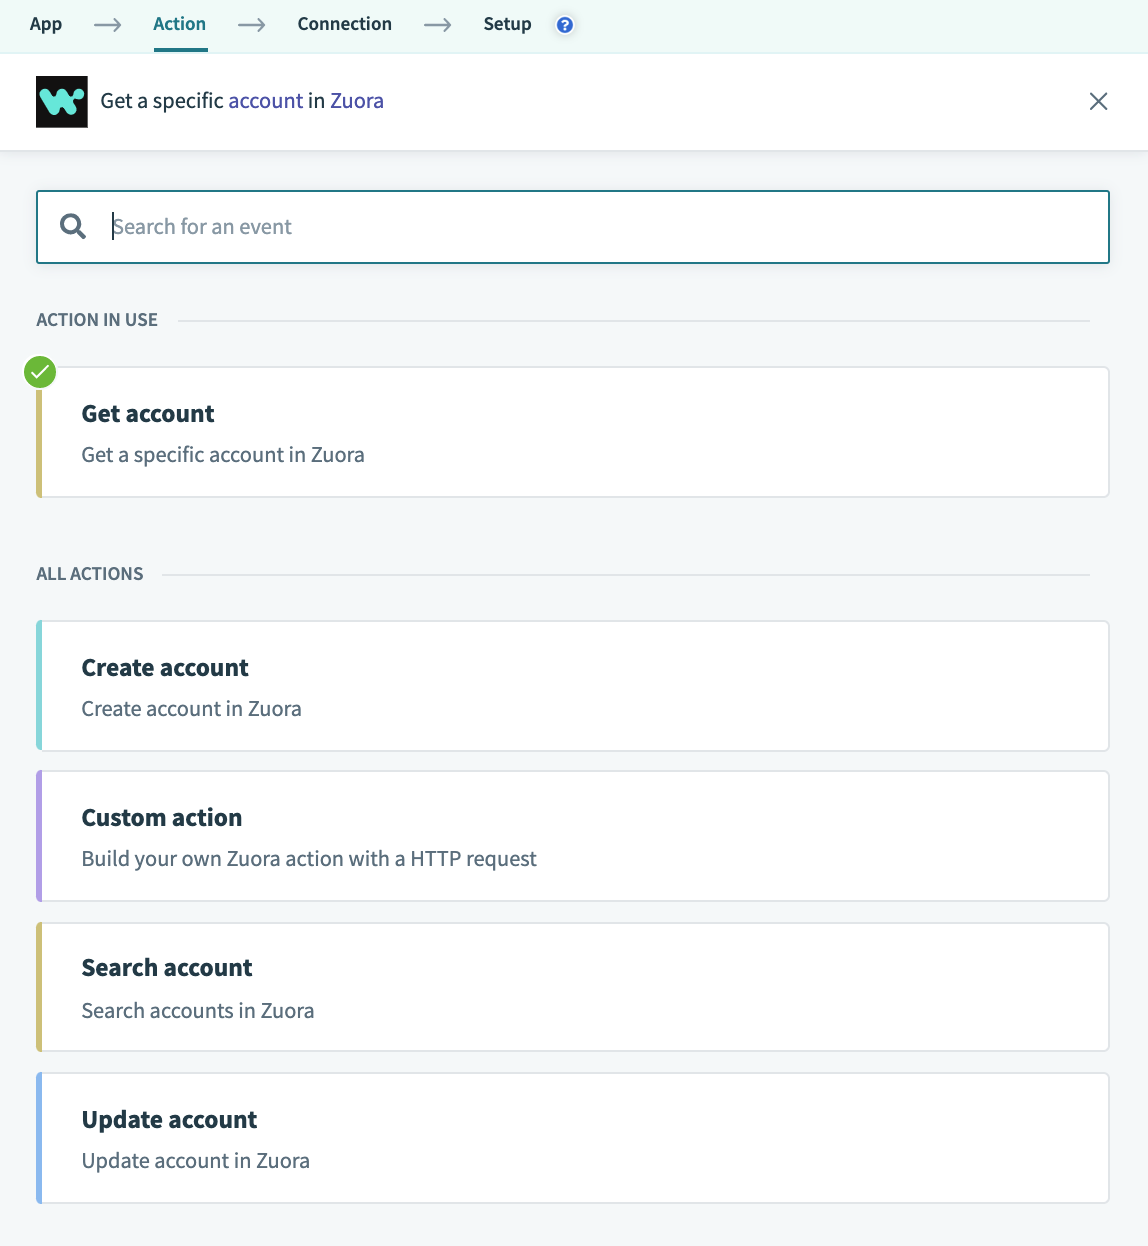 Selecting the get account action